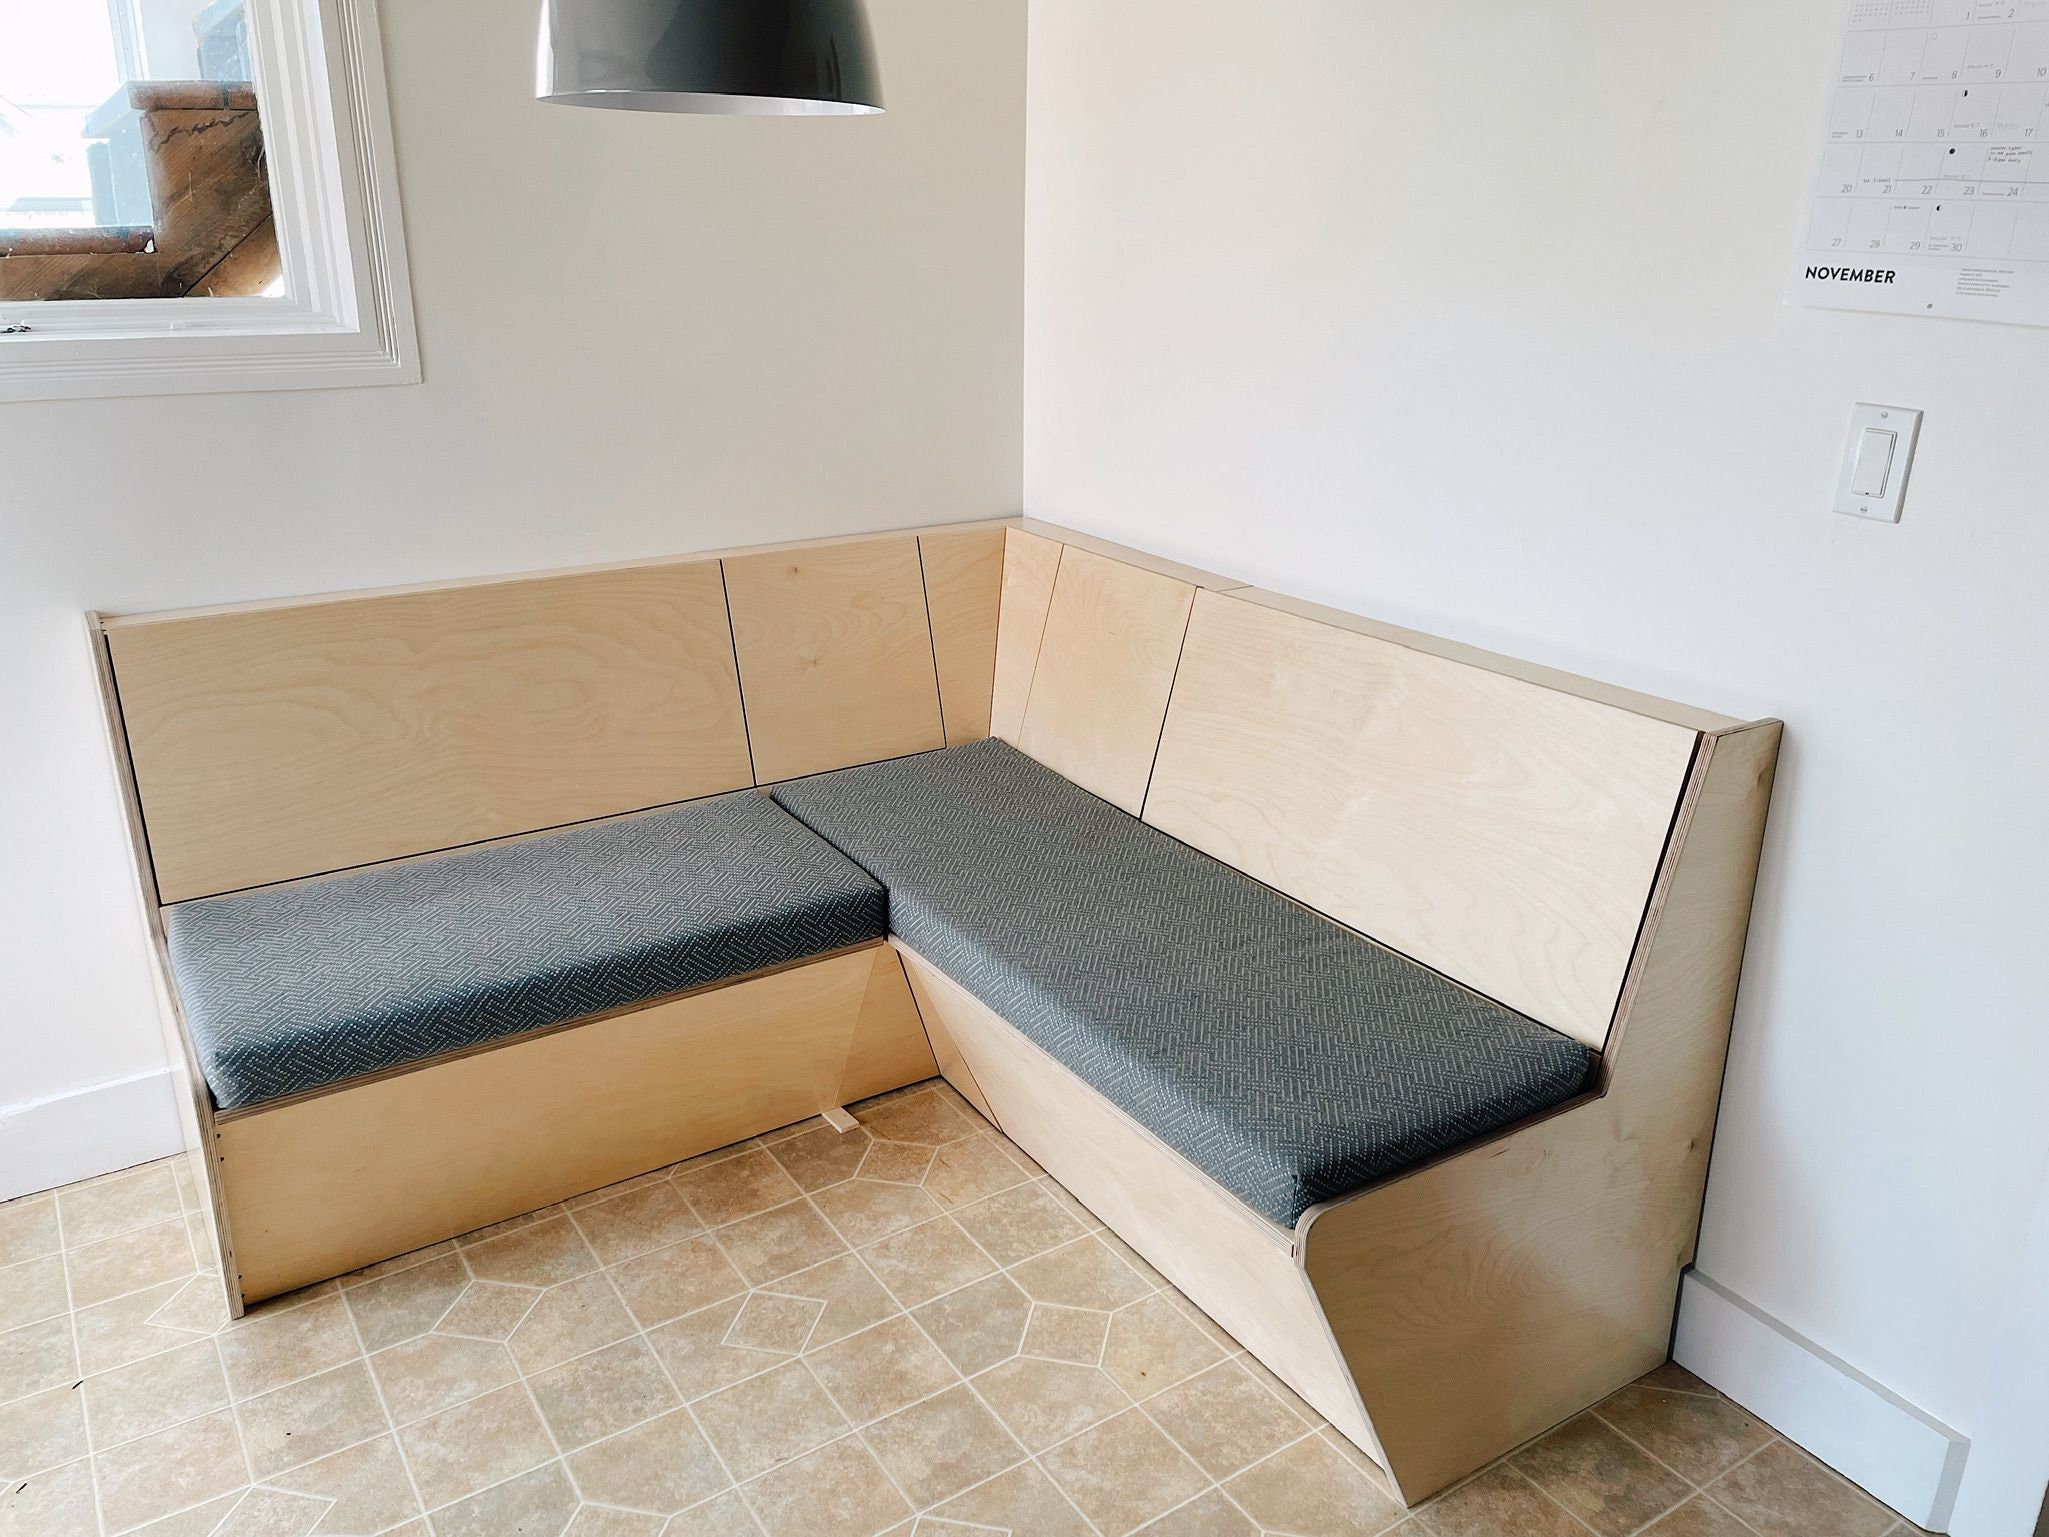 14 Clever Design Ideas for Banquette Benches with Storage